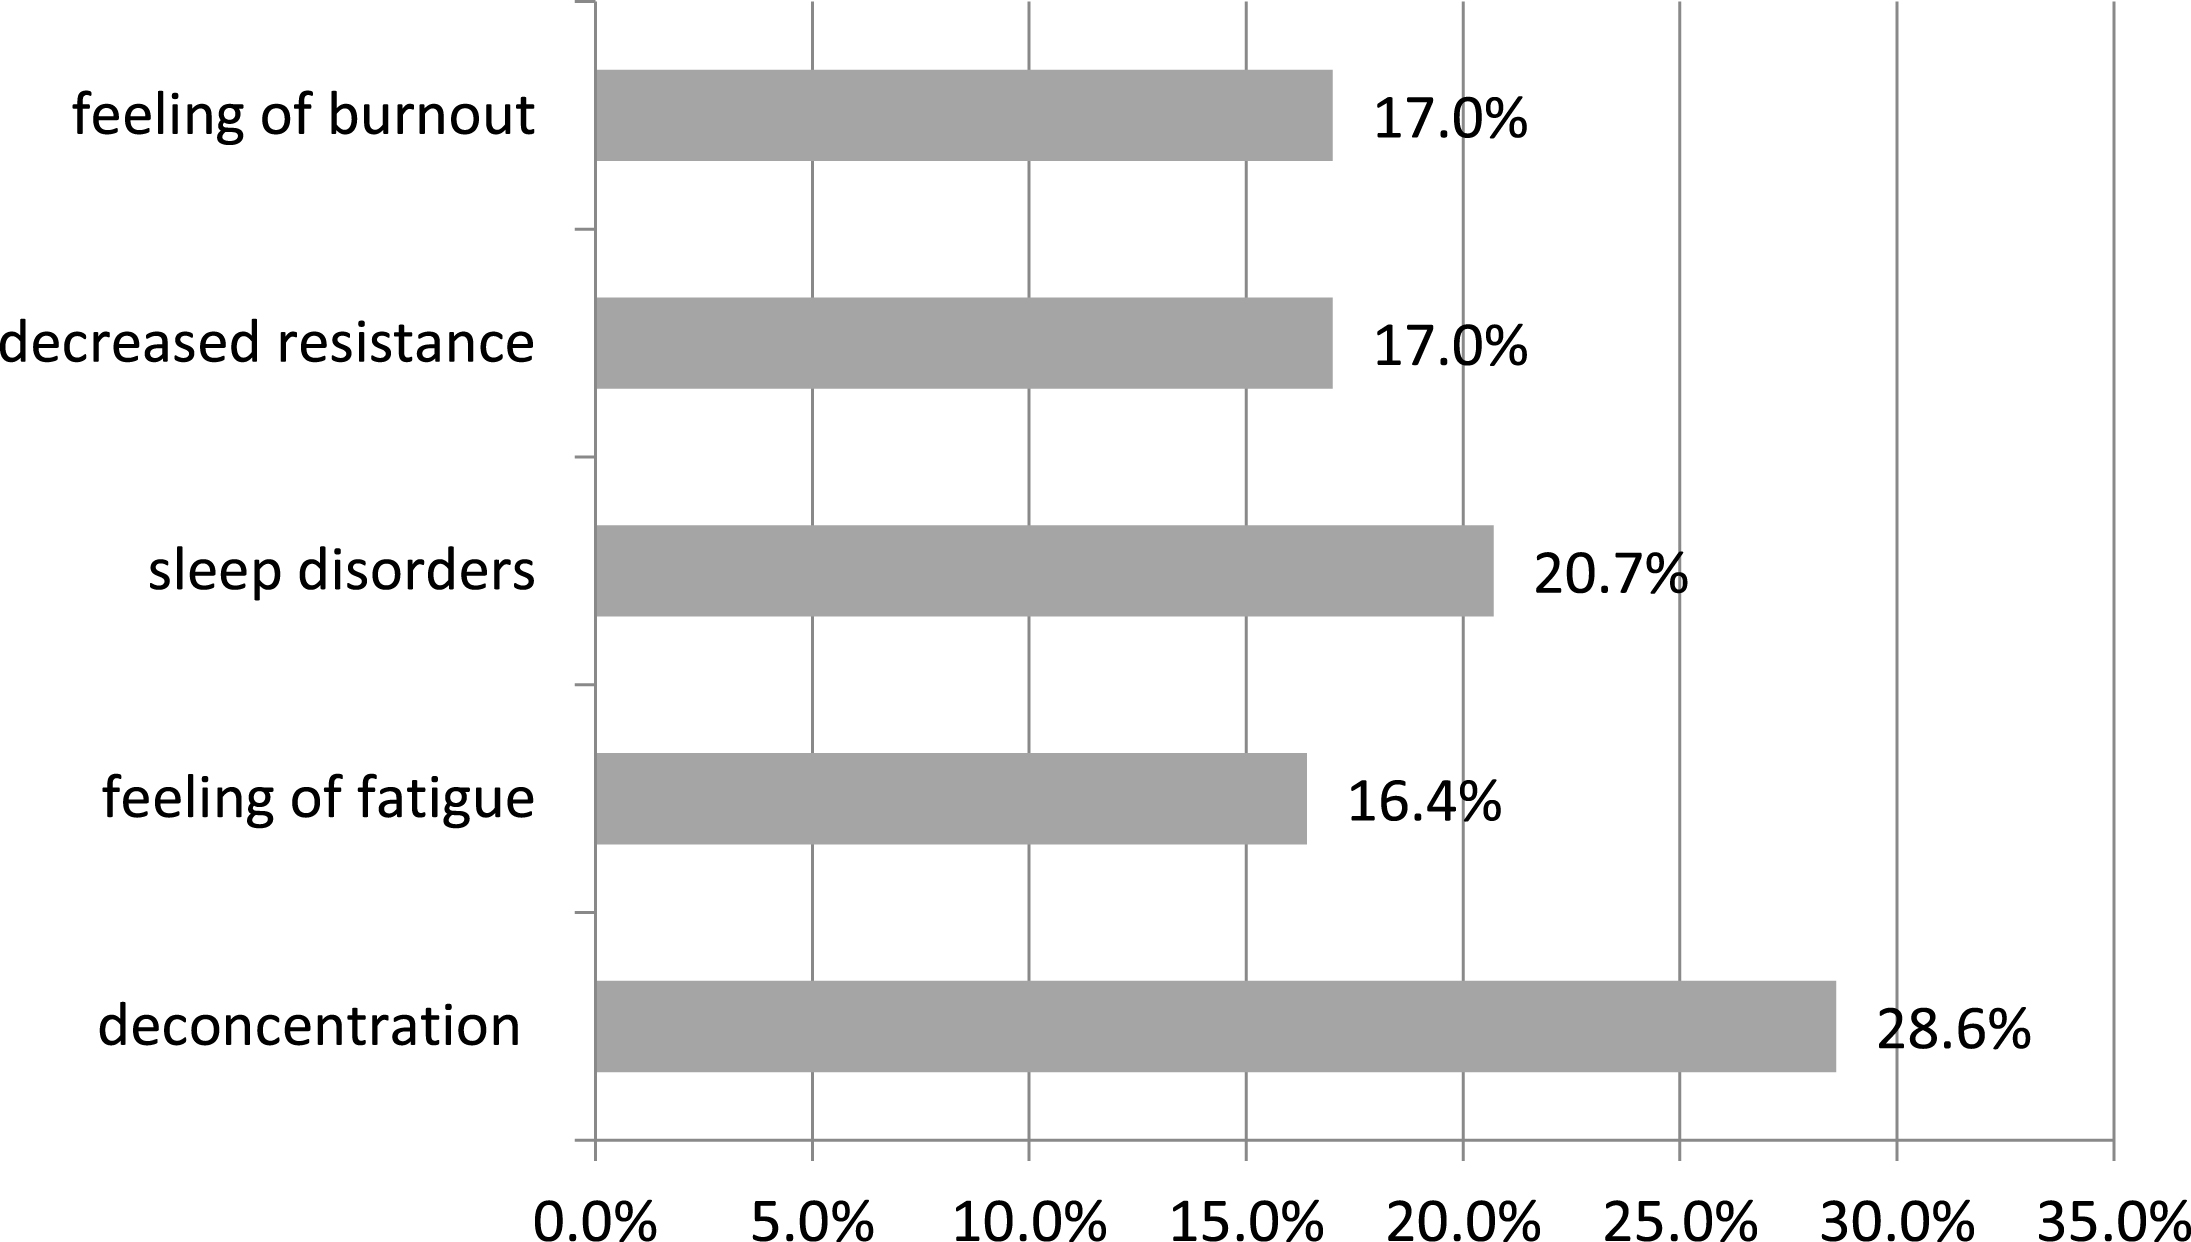 Most frequent psychological complaints accompanying shift work in respondents’ opinions.